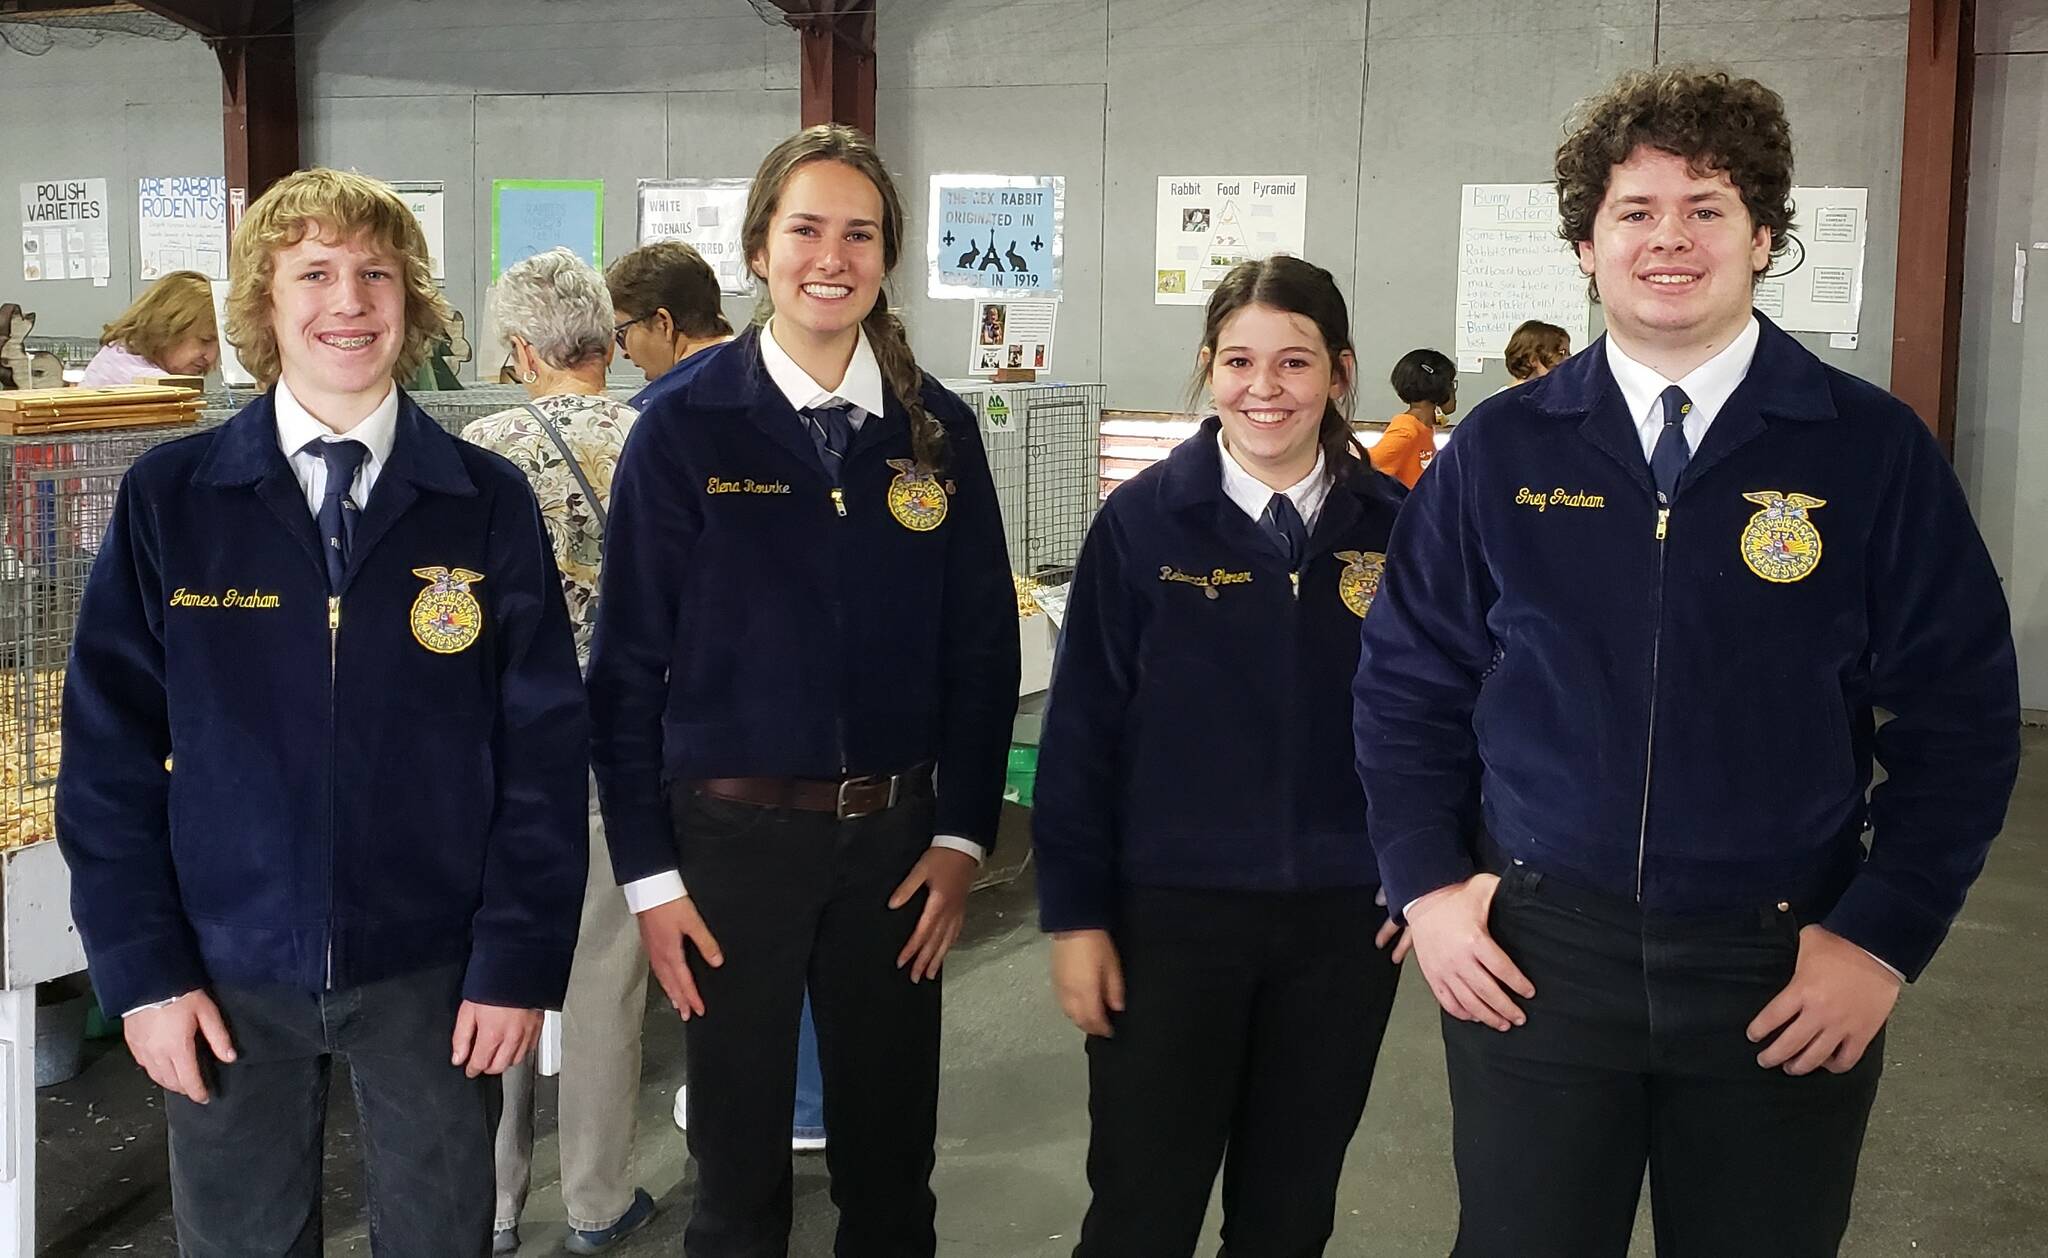 Mount Si Future Farmers of America students, from left James Graham, Elena Rourke, Rebecca Glover, and Greg Graham. Photo Courtesy of the Snoqualmie Valley School District